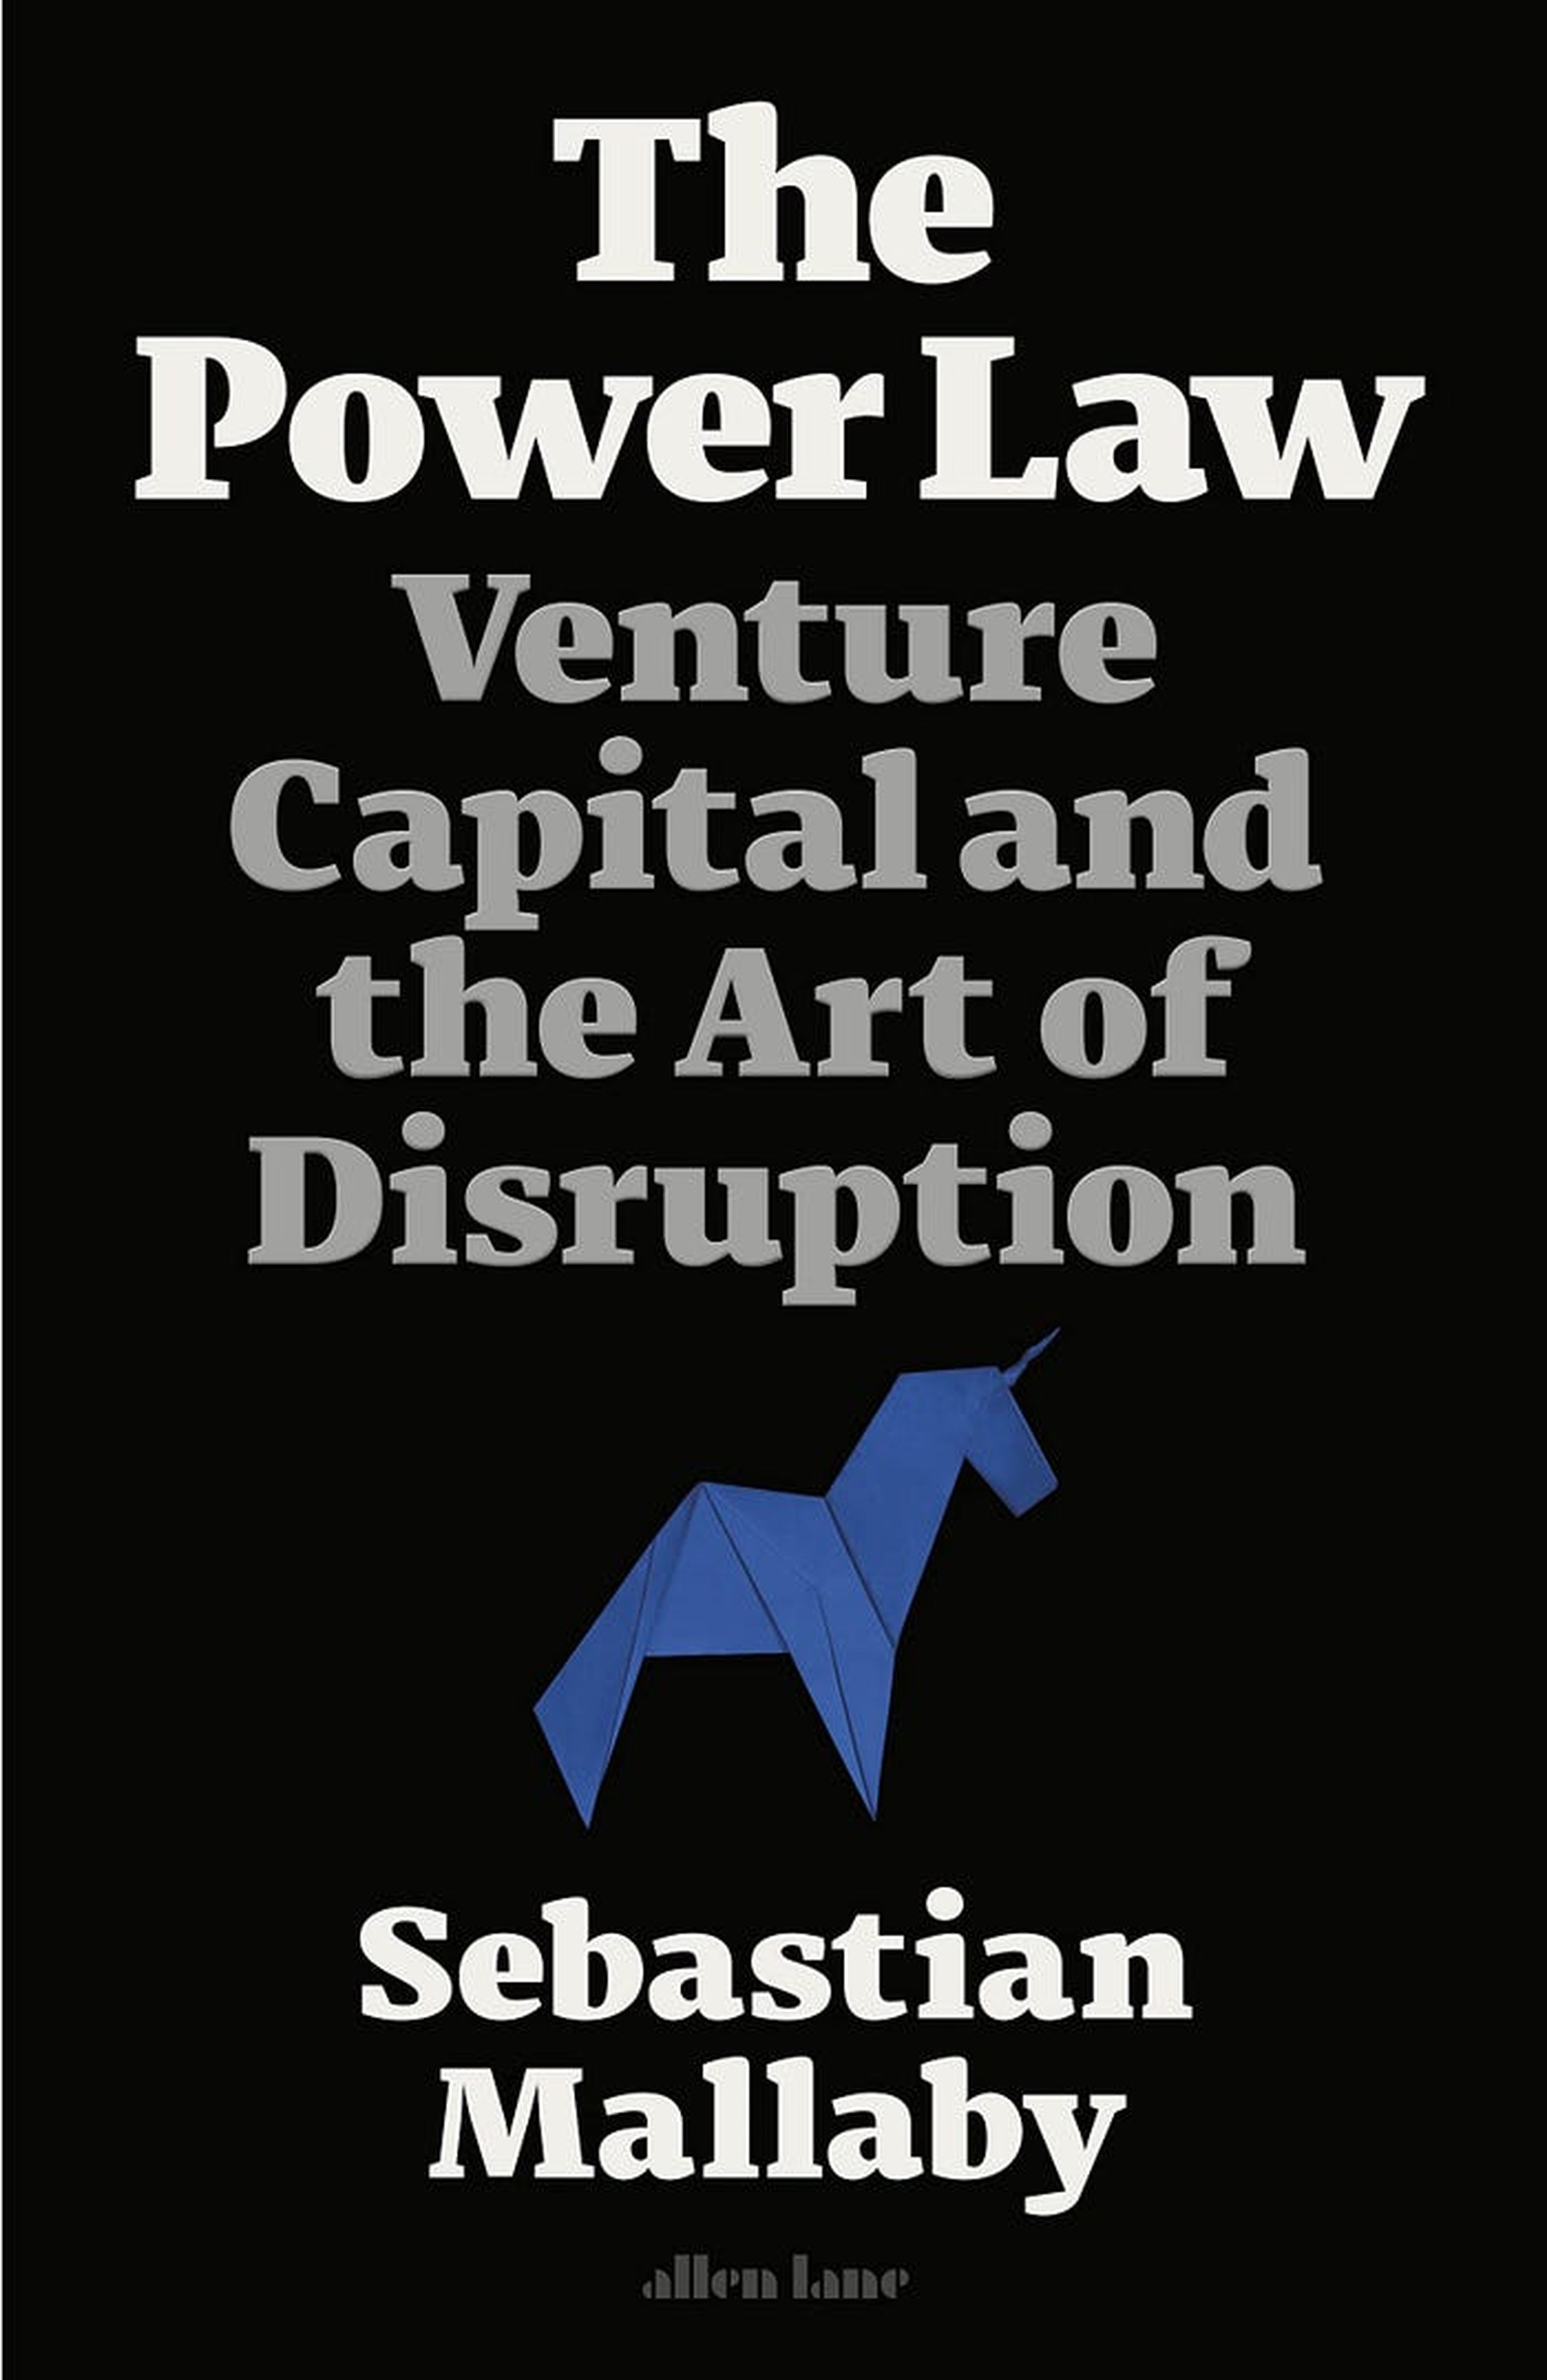 The power law